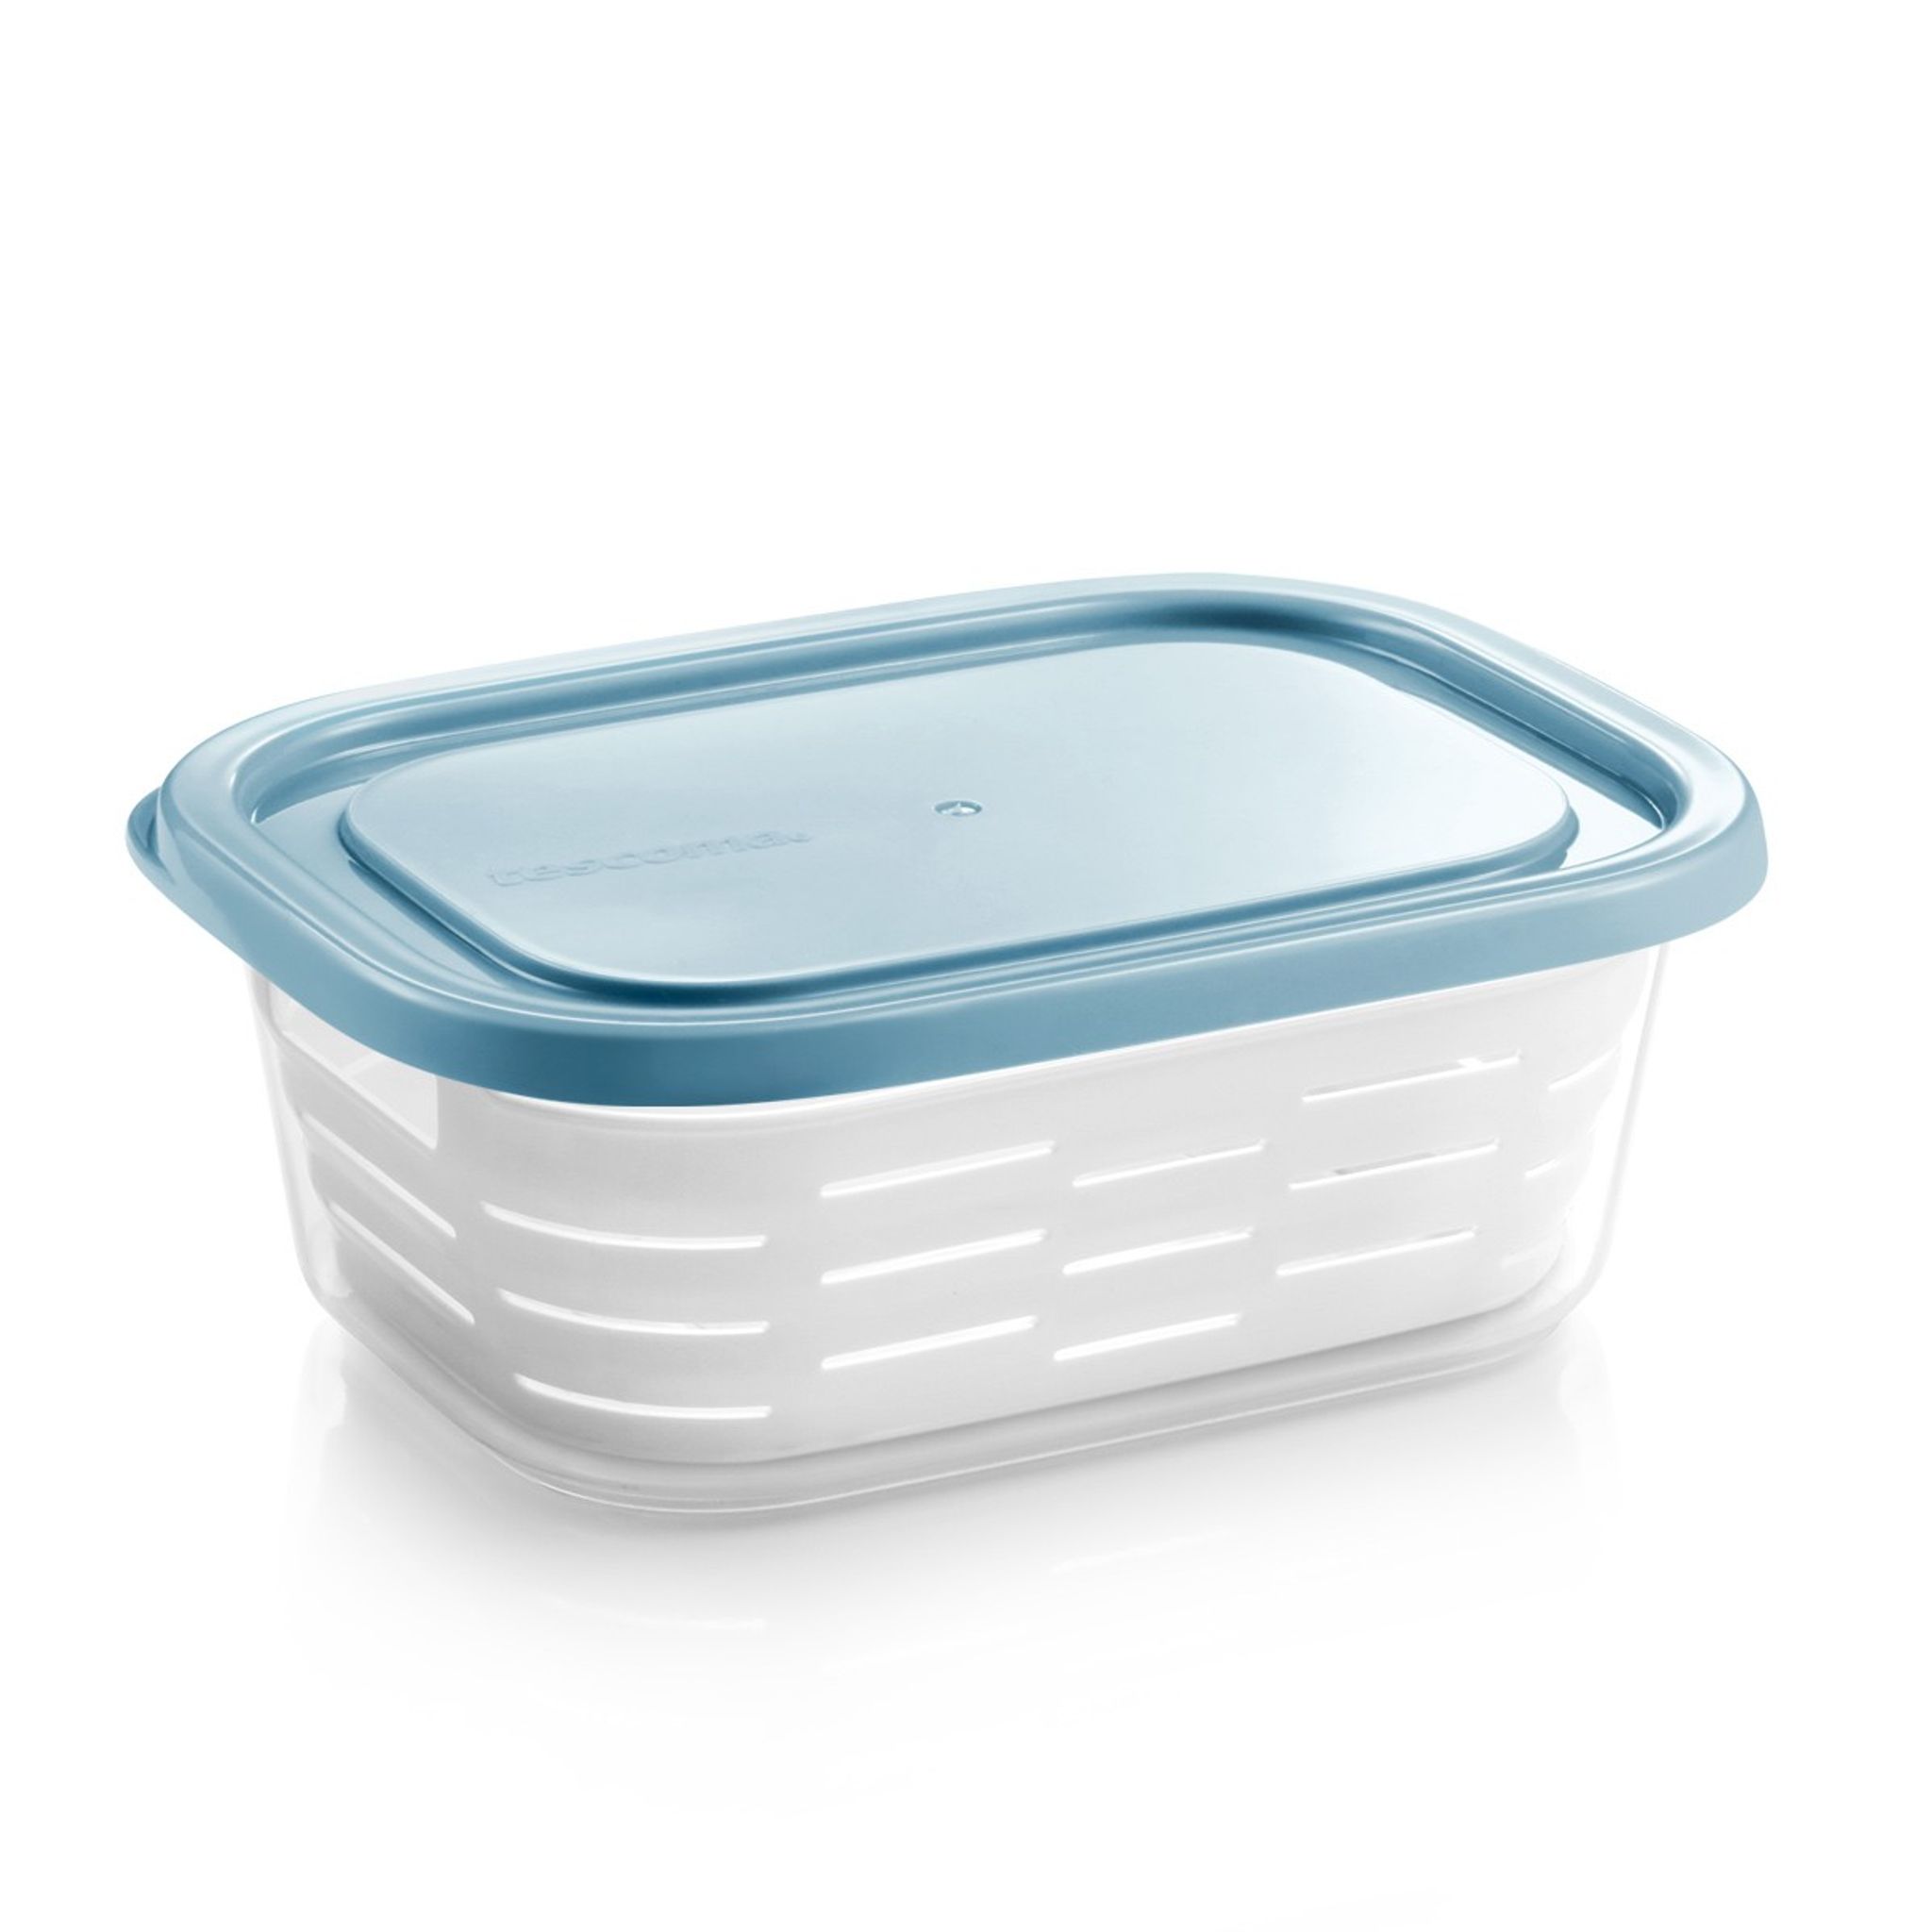 Freezer container with basket 4FOOD 2.0 l